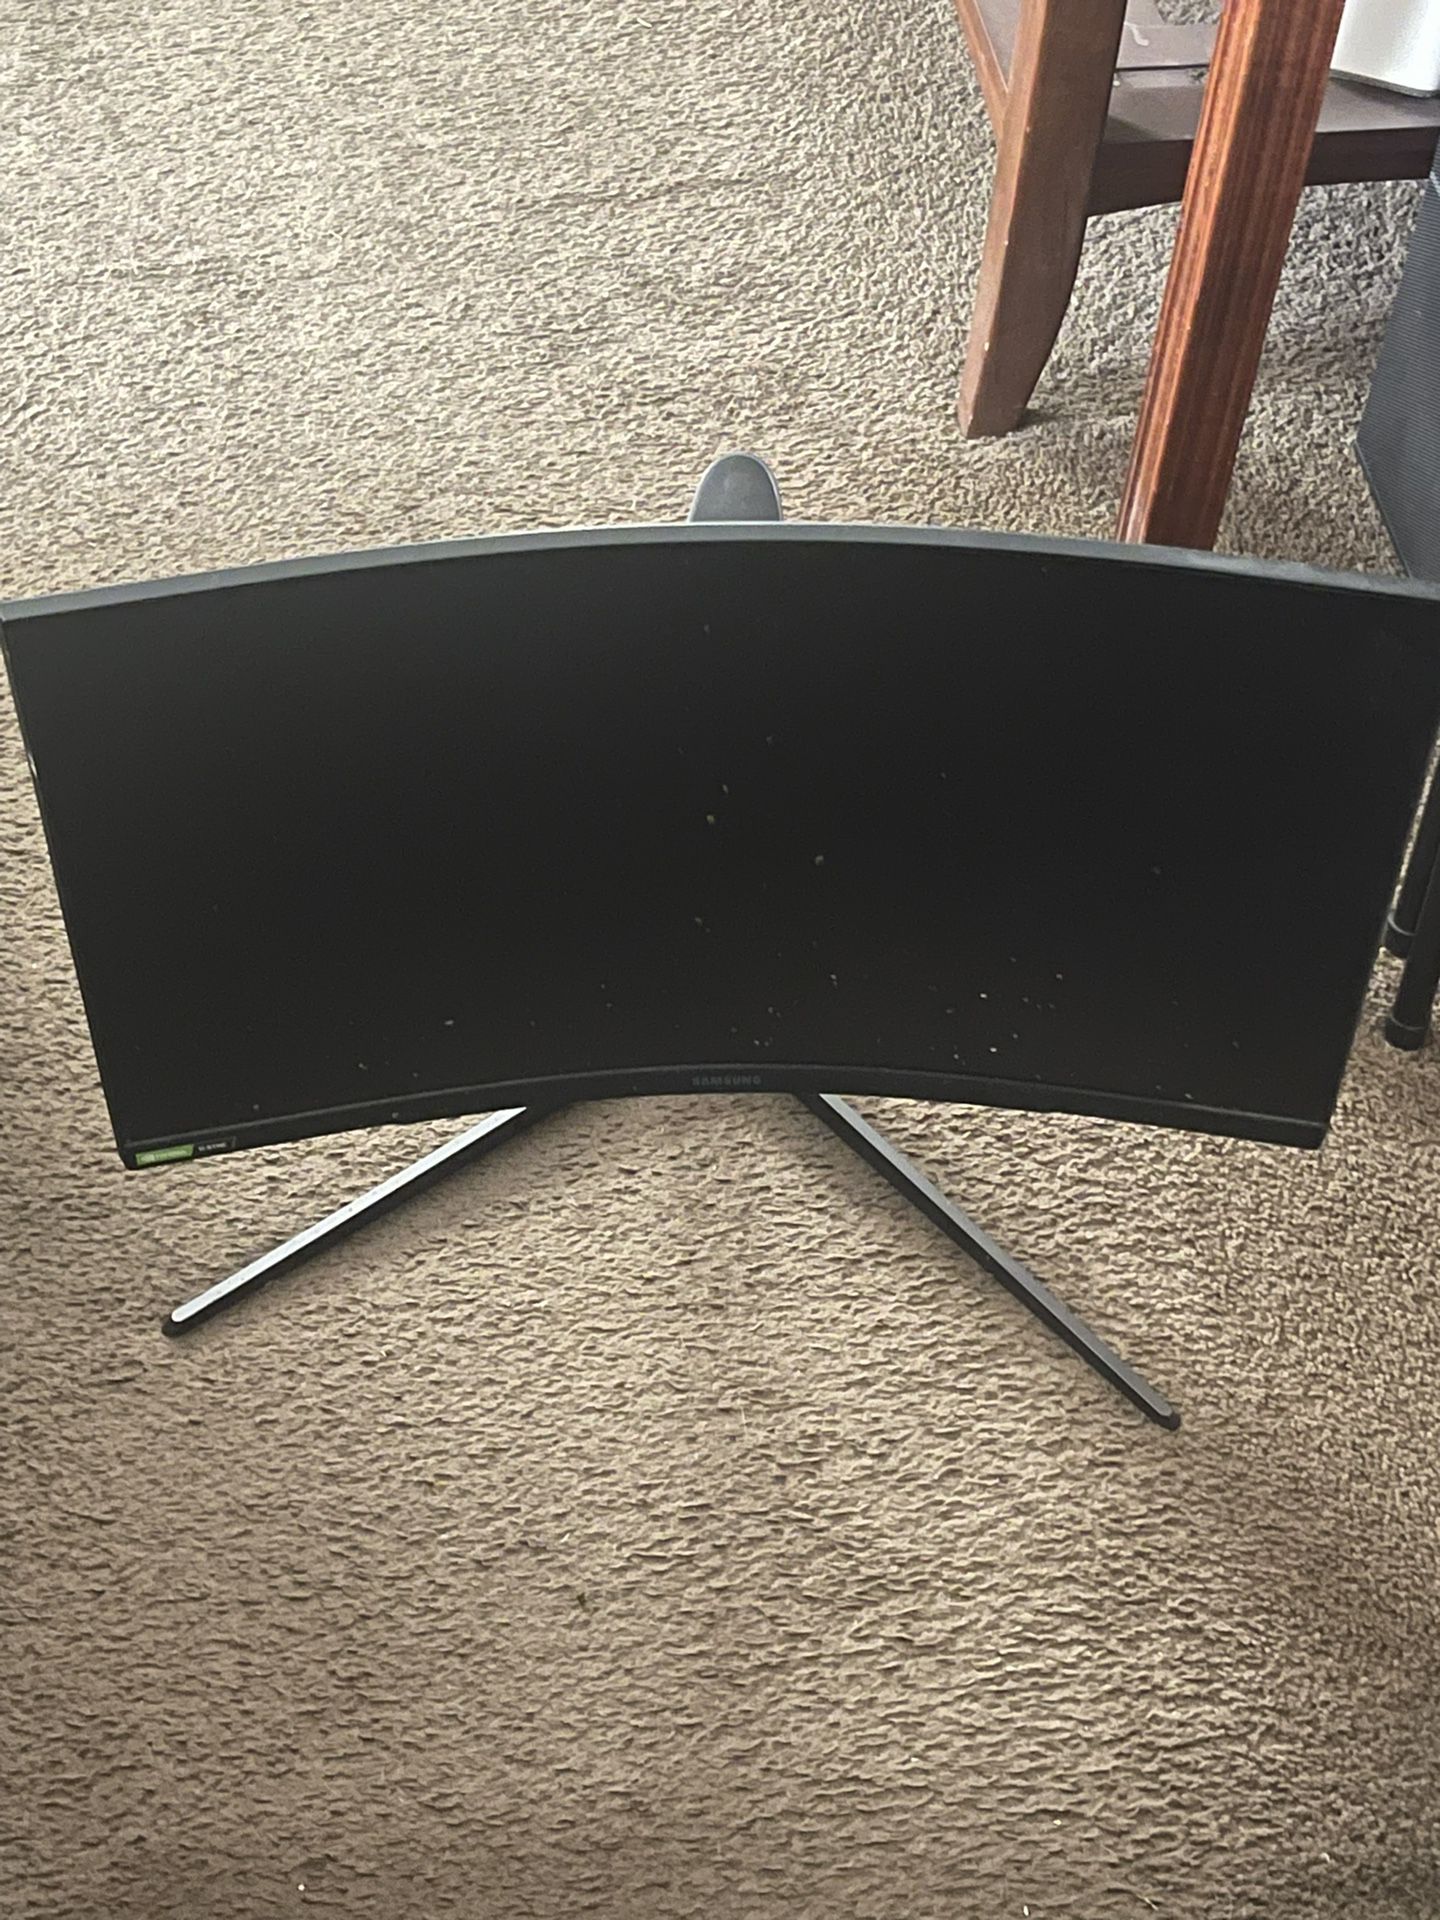 Samsung Odyssey G7 - 27” Curved Gaming Monitor